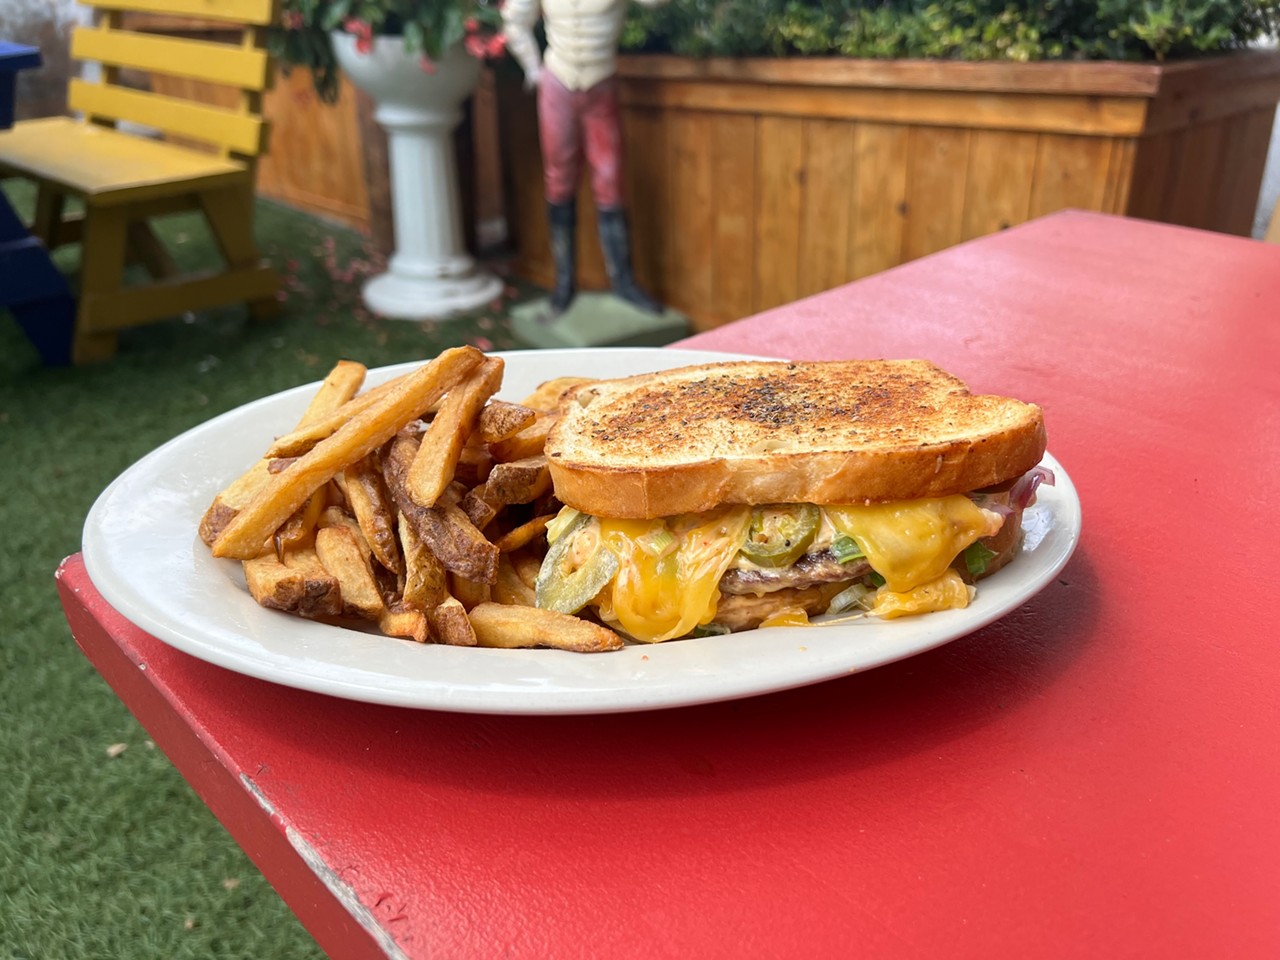 Bombay Bicycle Club
3506 N St Mary's St
Bombetter Patty Melt
Toasty oregano sourdough, 100% Angus Beef patty,  sweet red onion, green onion, chipotle mayo, pickled jalapeno, Swiss, cheddar, jack & American cheese. Or add toppings for the ultimate!